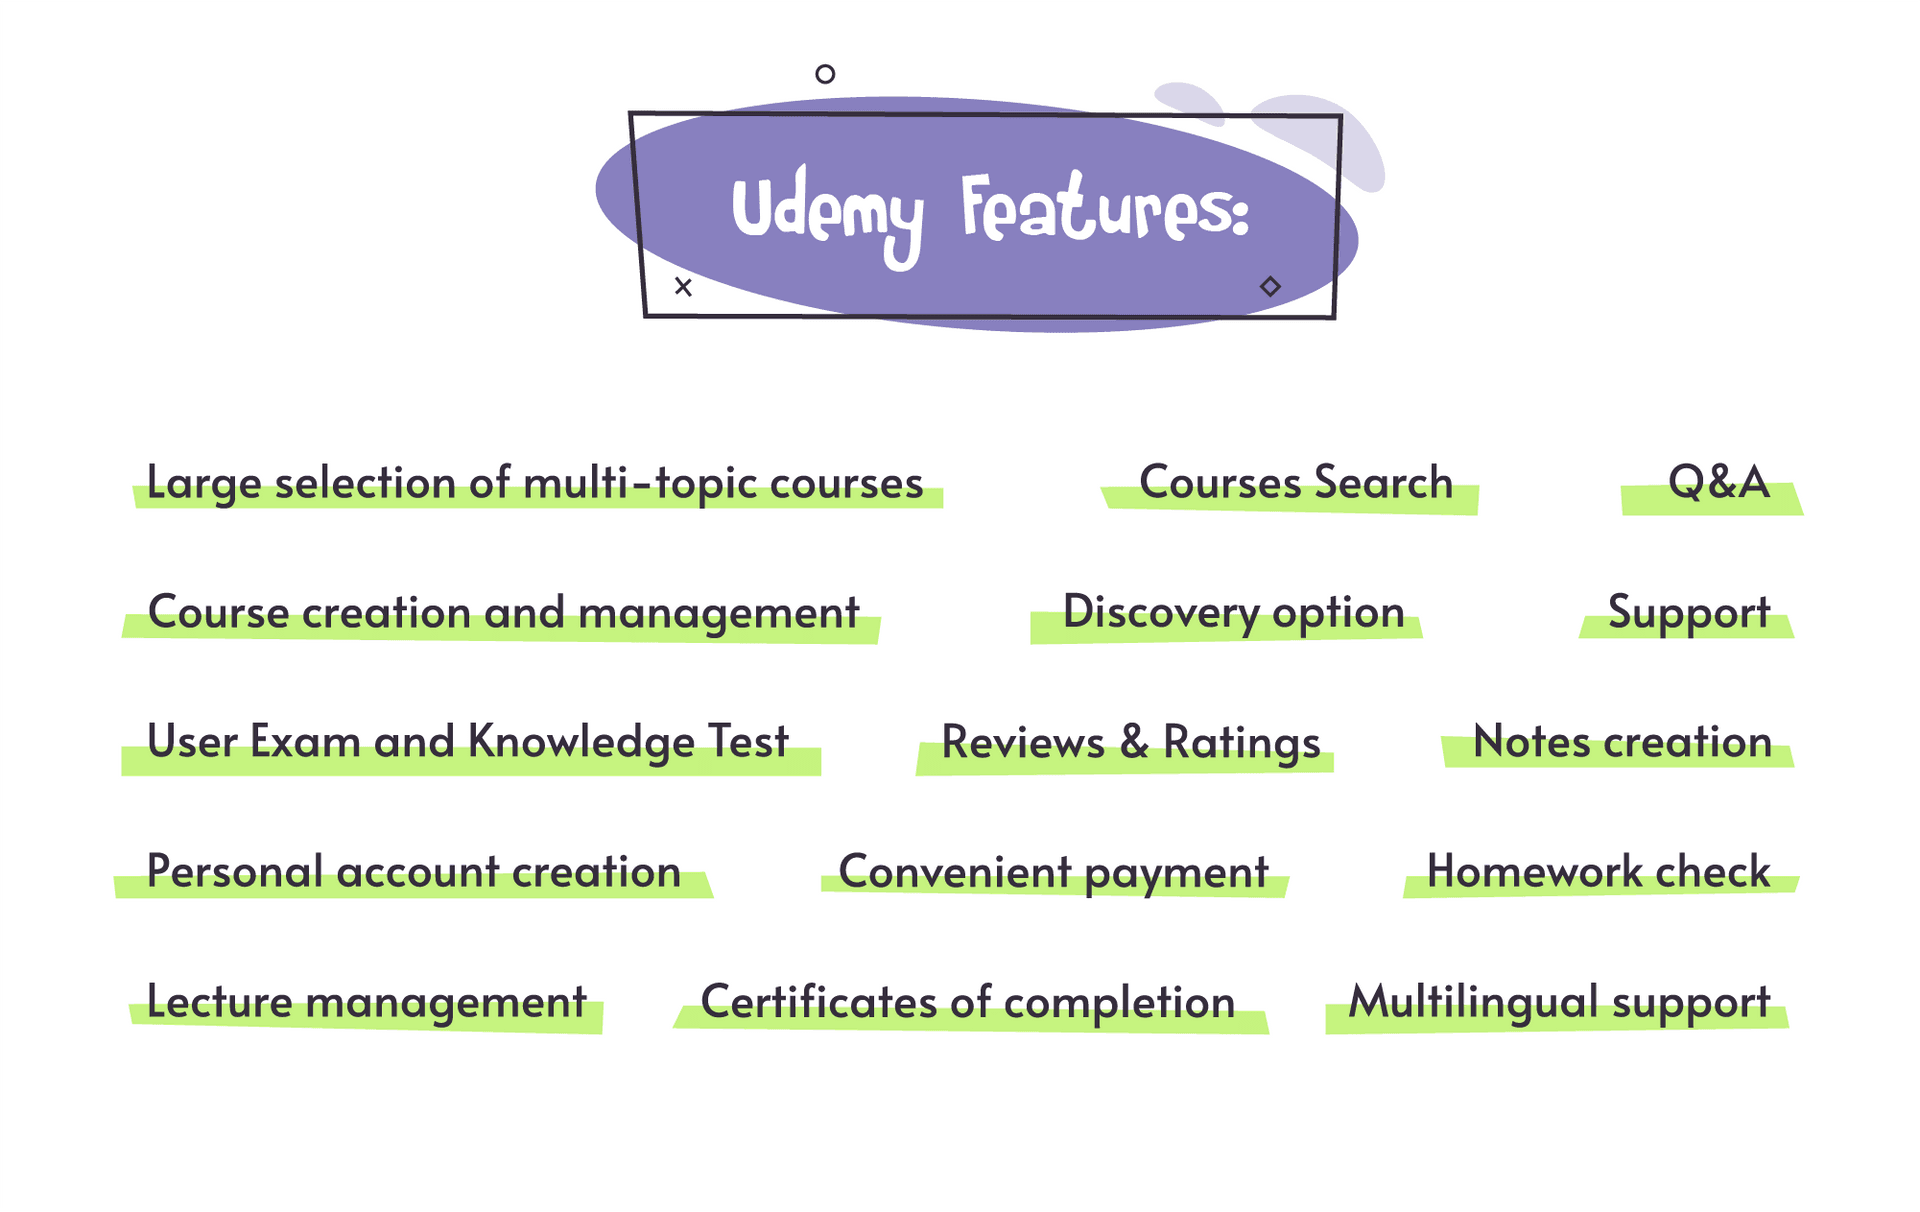 Udemy features